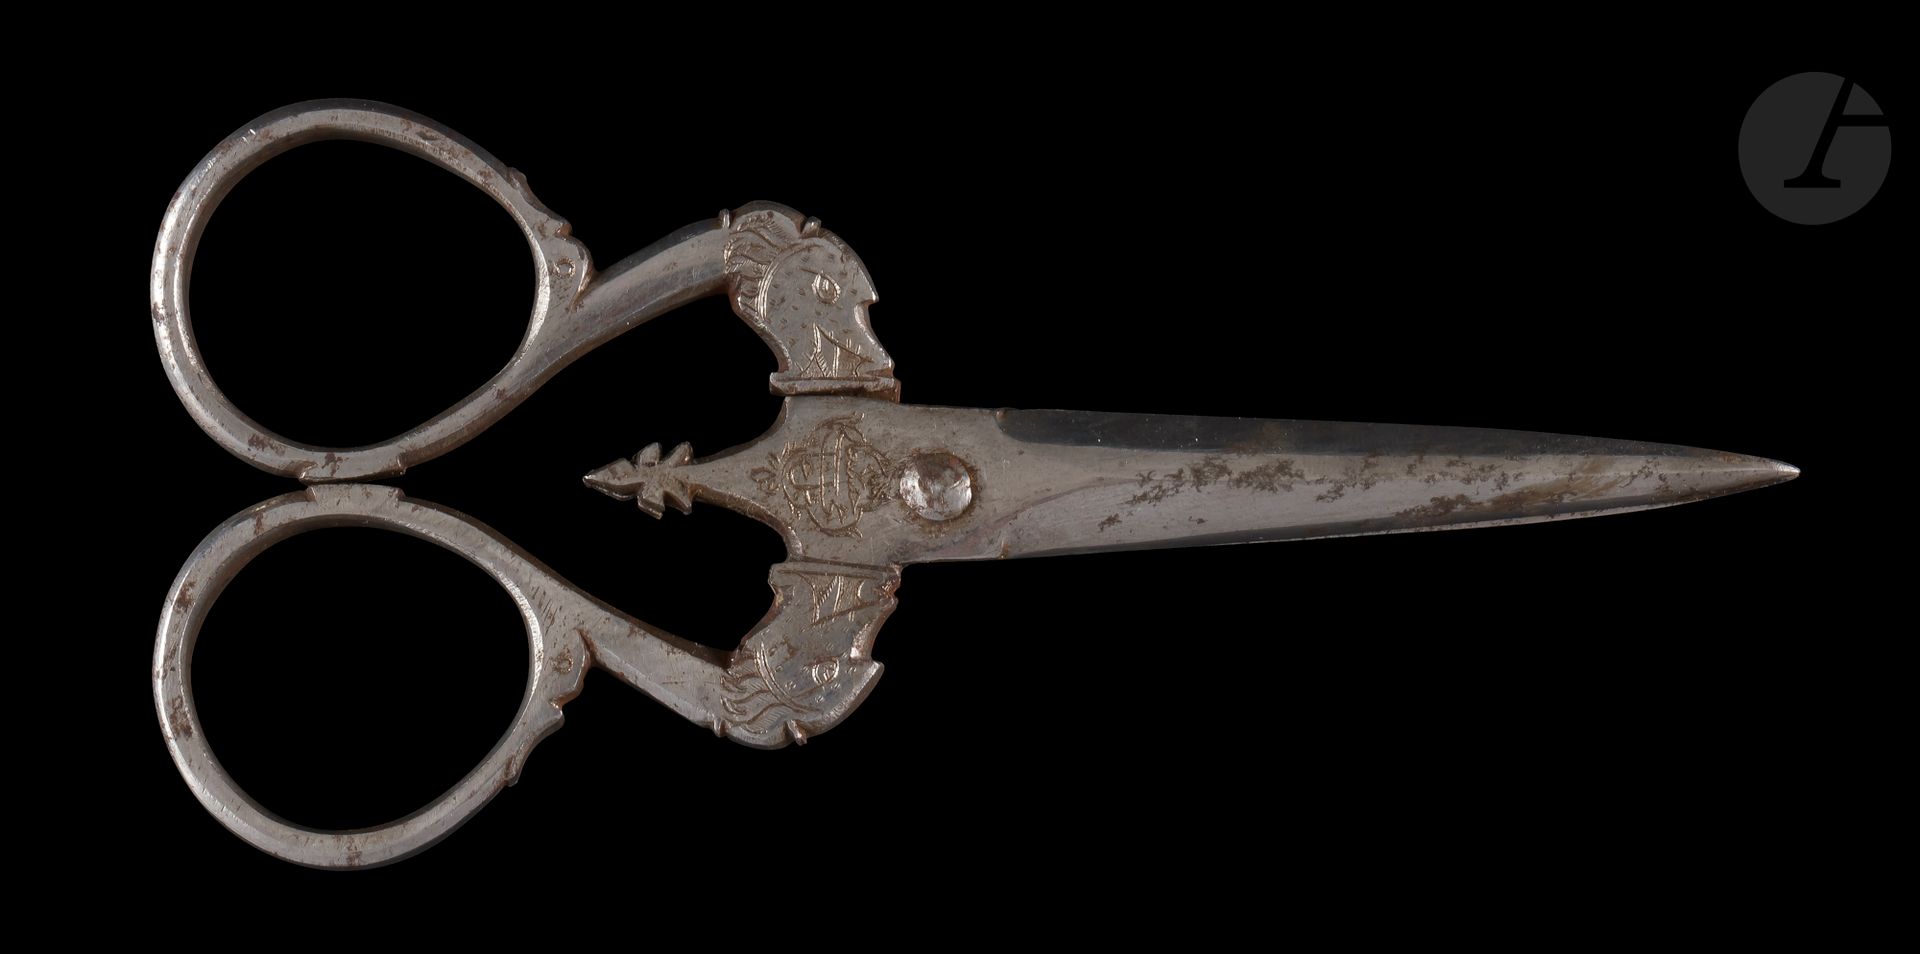 Null Pair of tailor's scissors, Iran, late 19th - early 20th century
Made of ste&hellip;